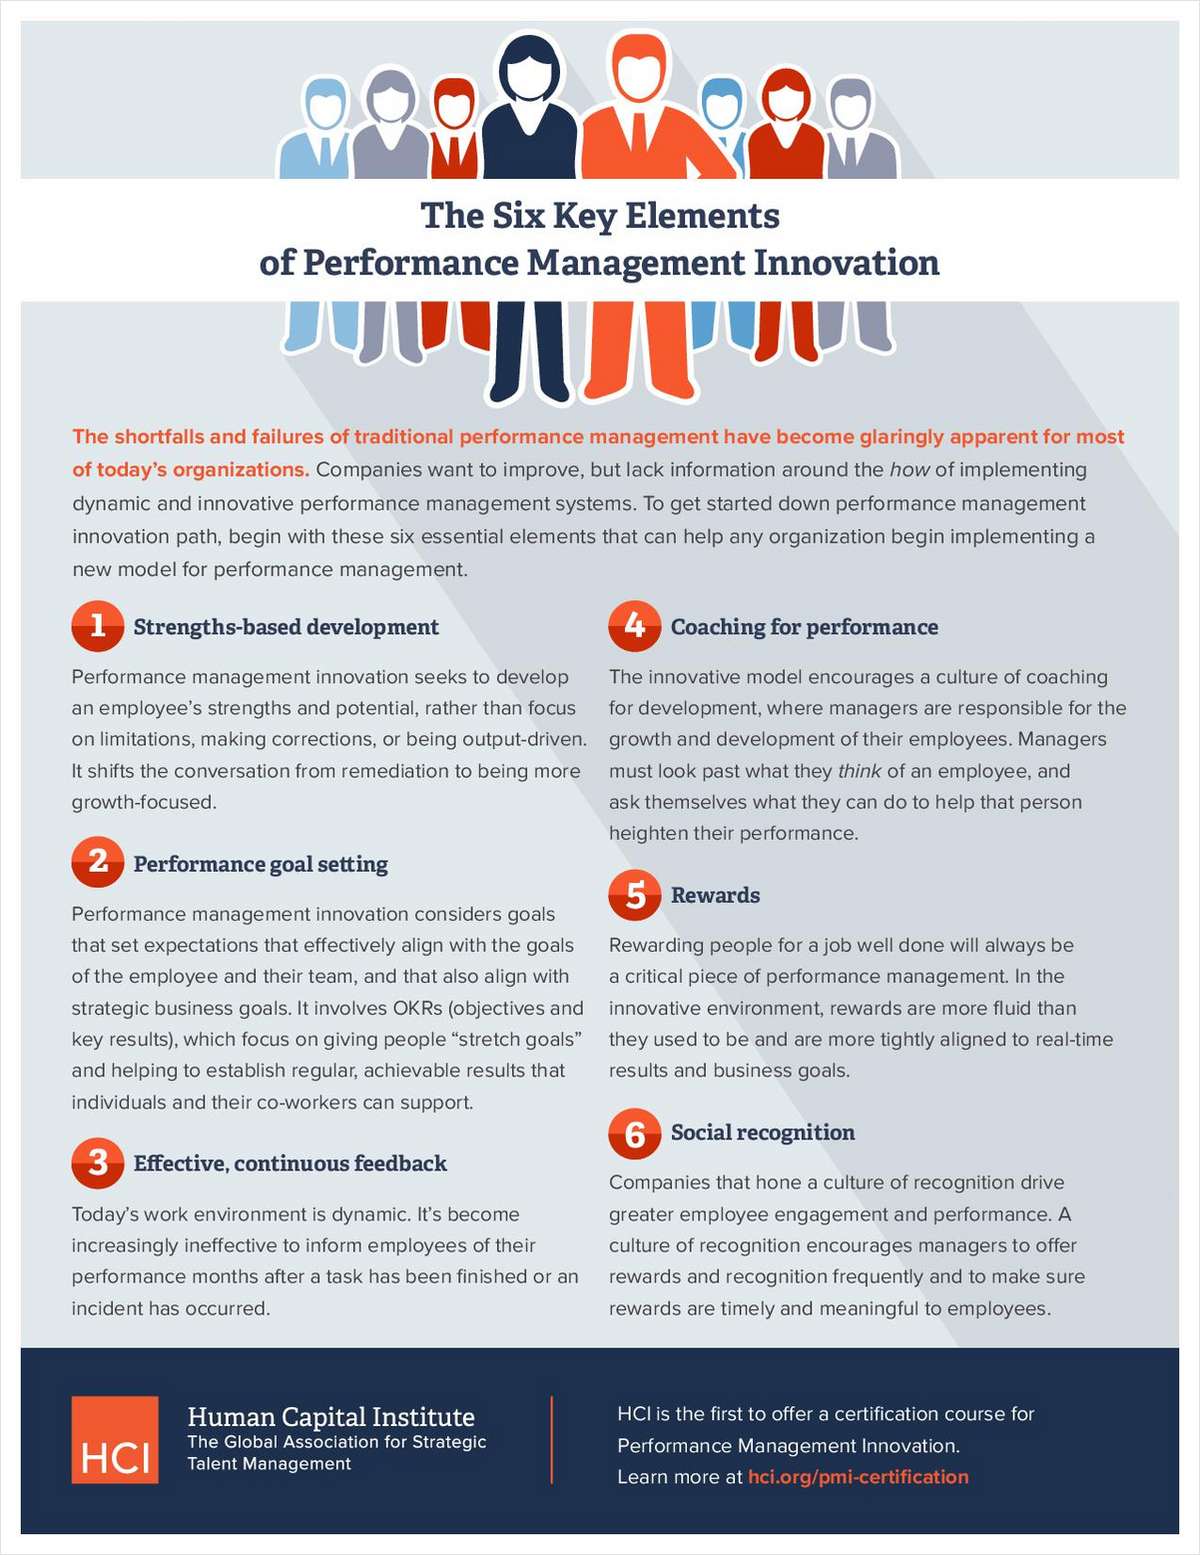 The Six Key Elements of Performance Management Innovation